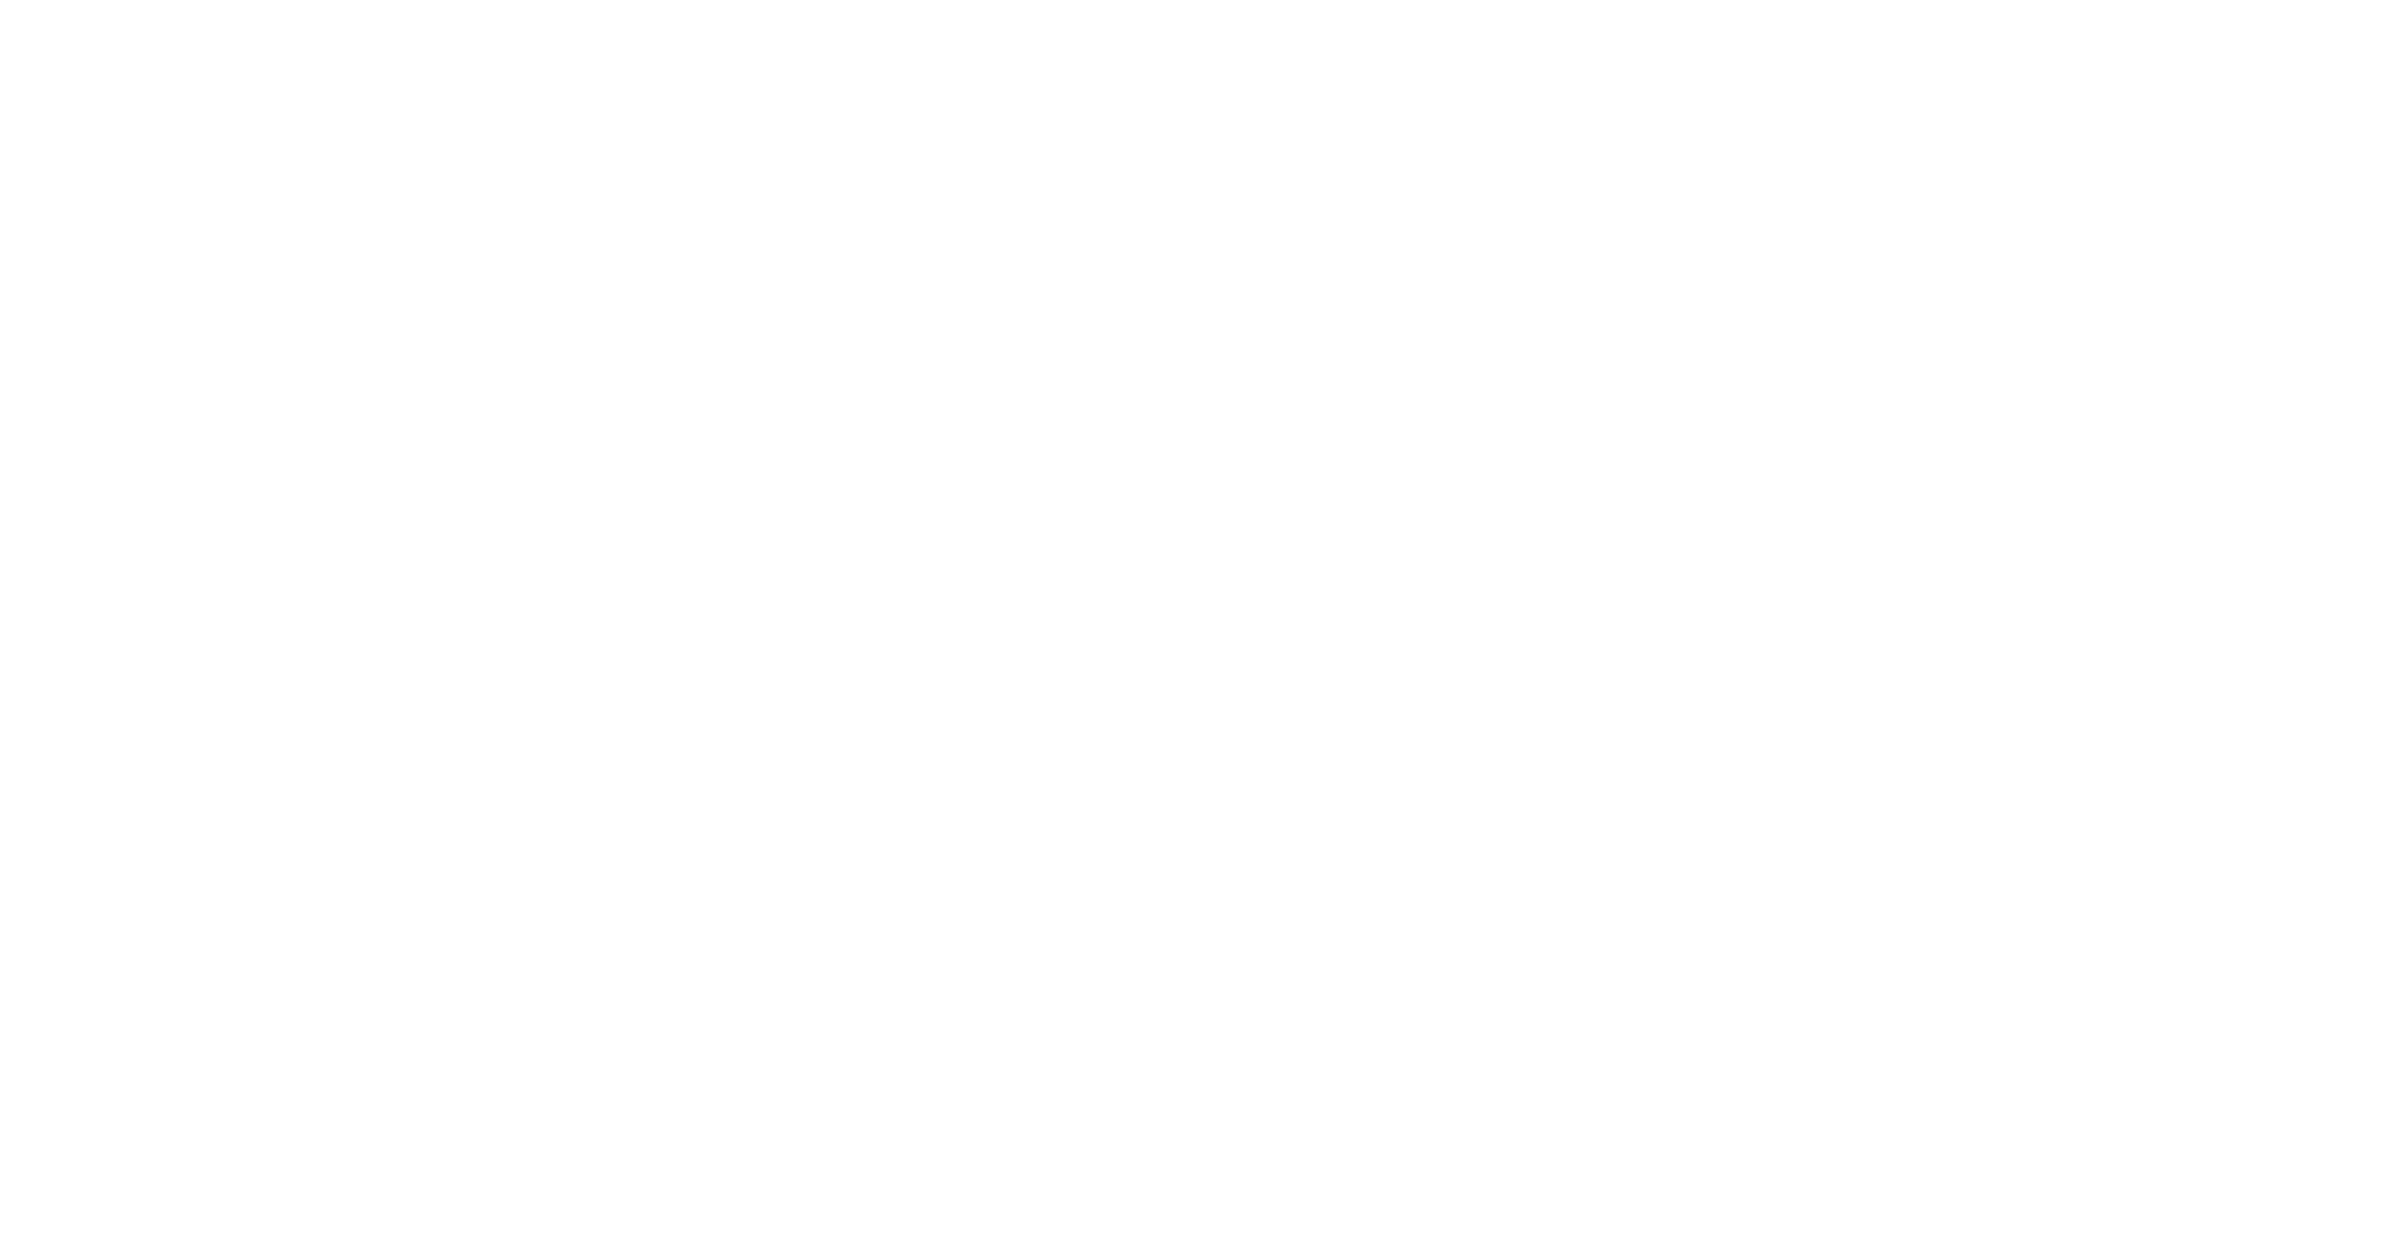 Thumbnail for the project Trunkshop